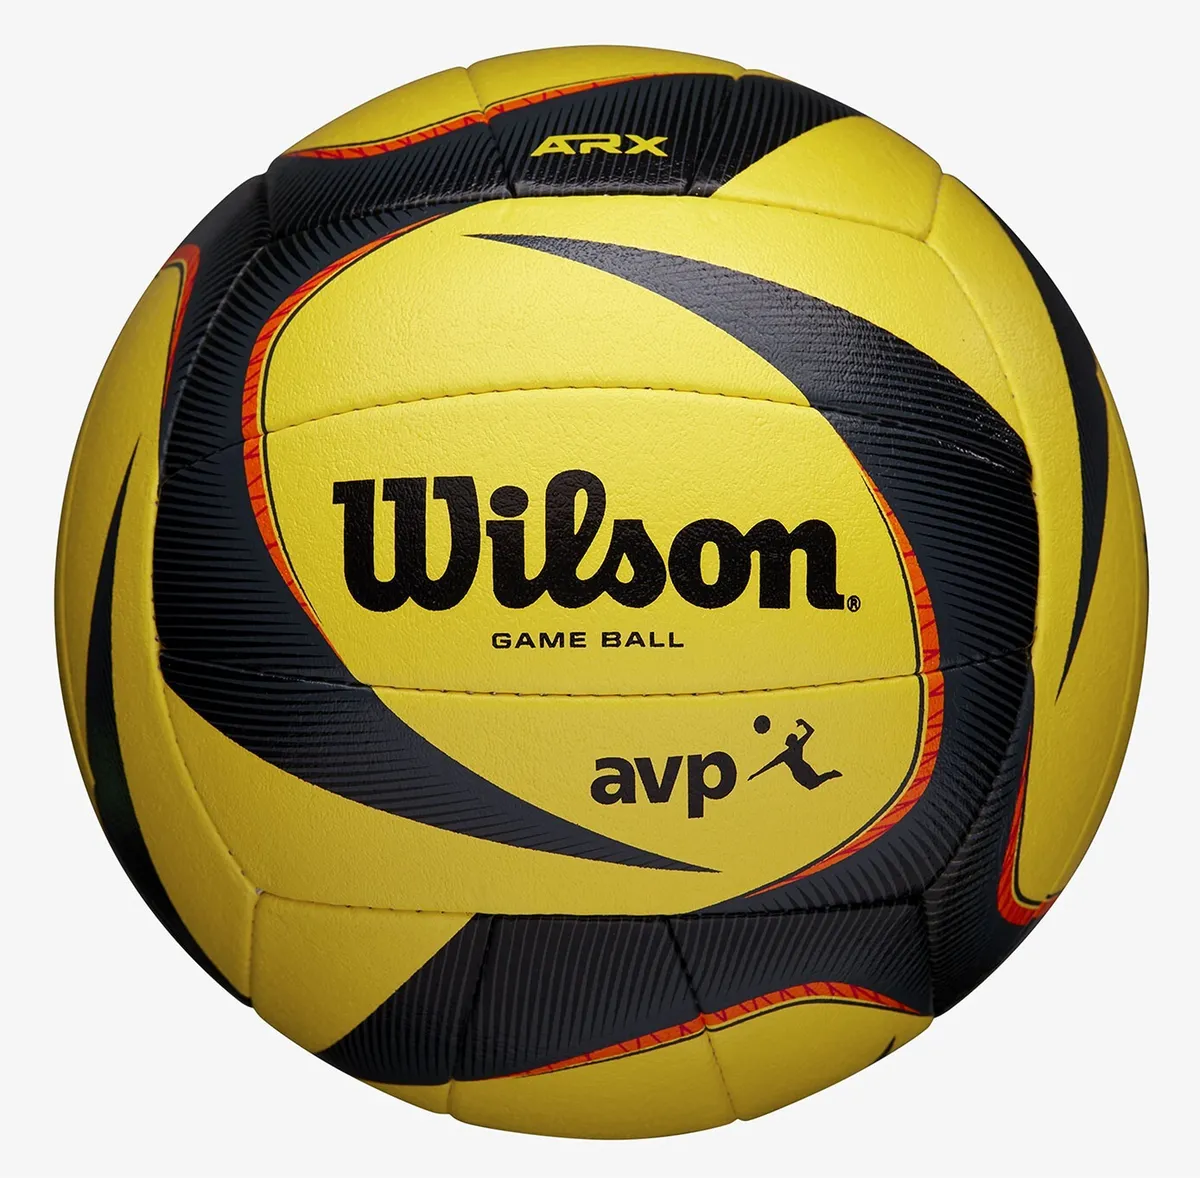 What Ball Can I Use Instead of a Volleyball?